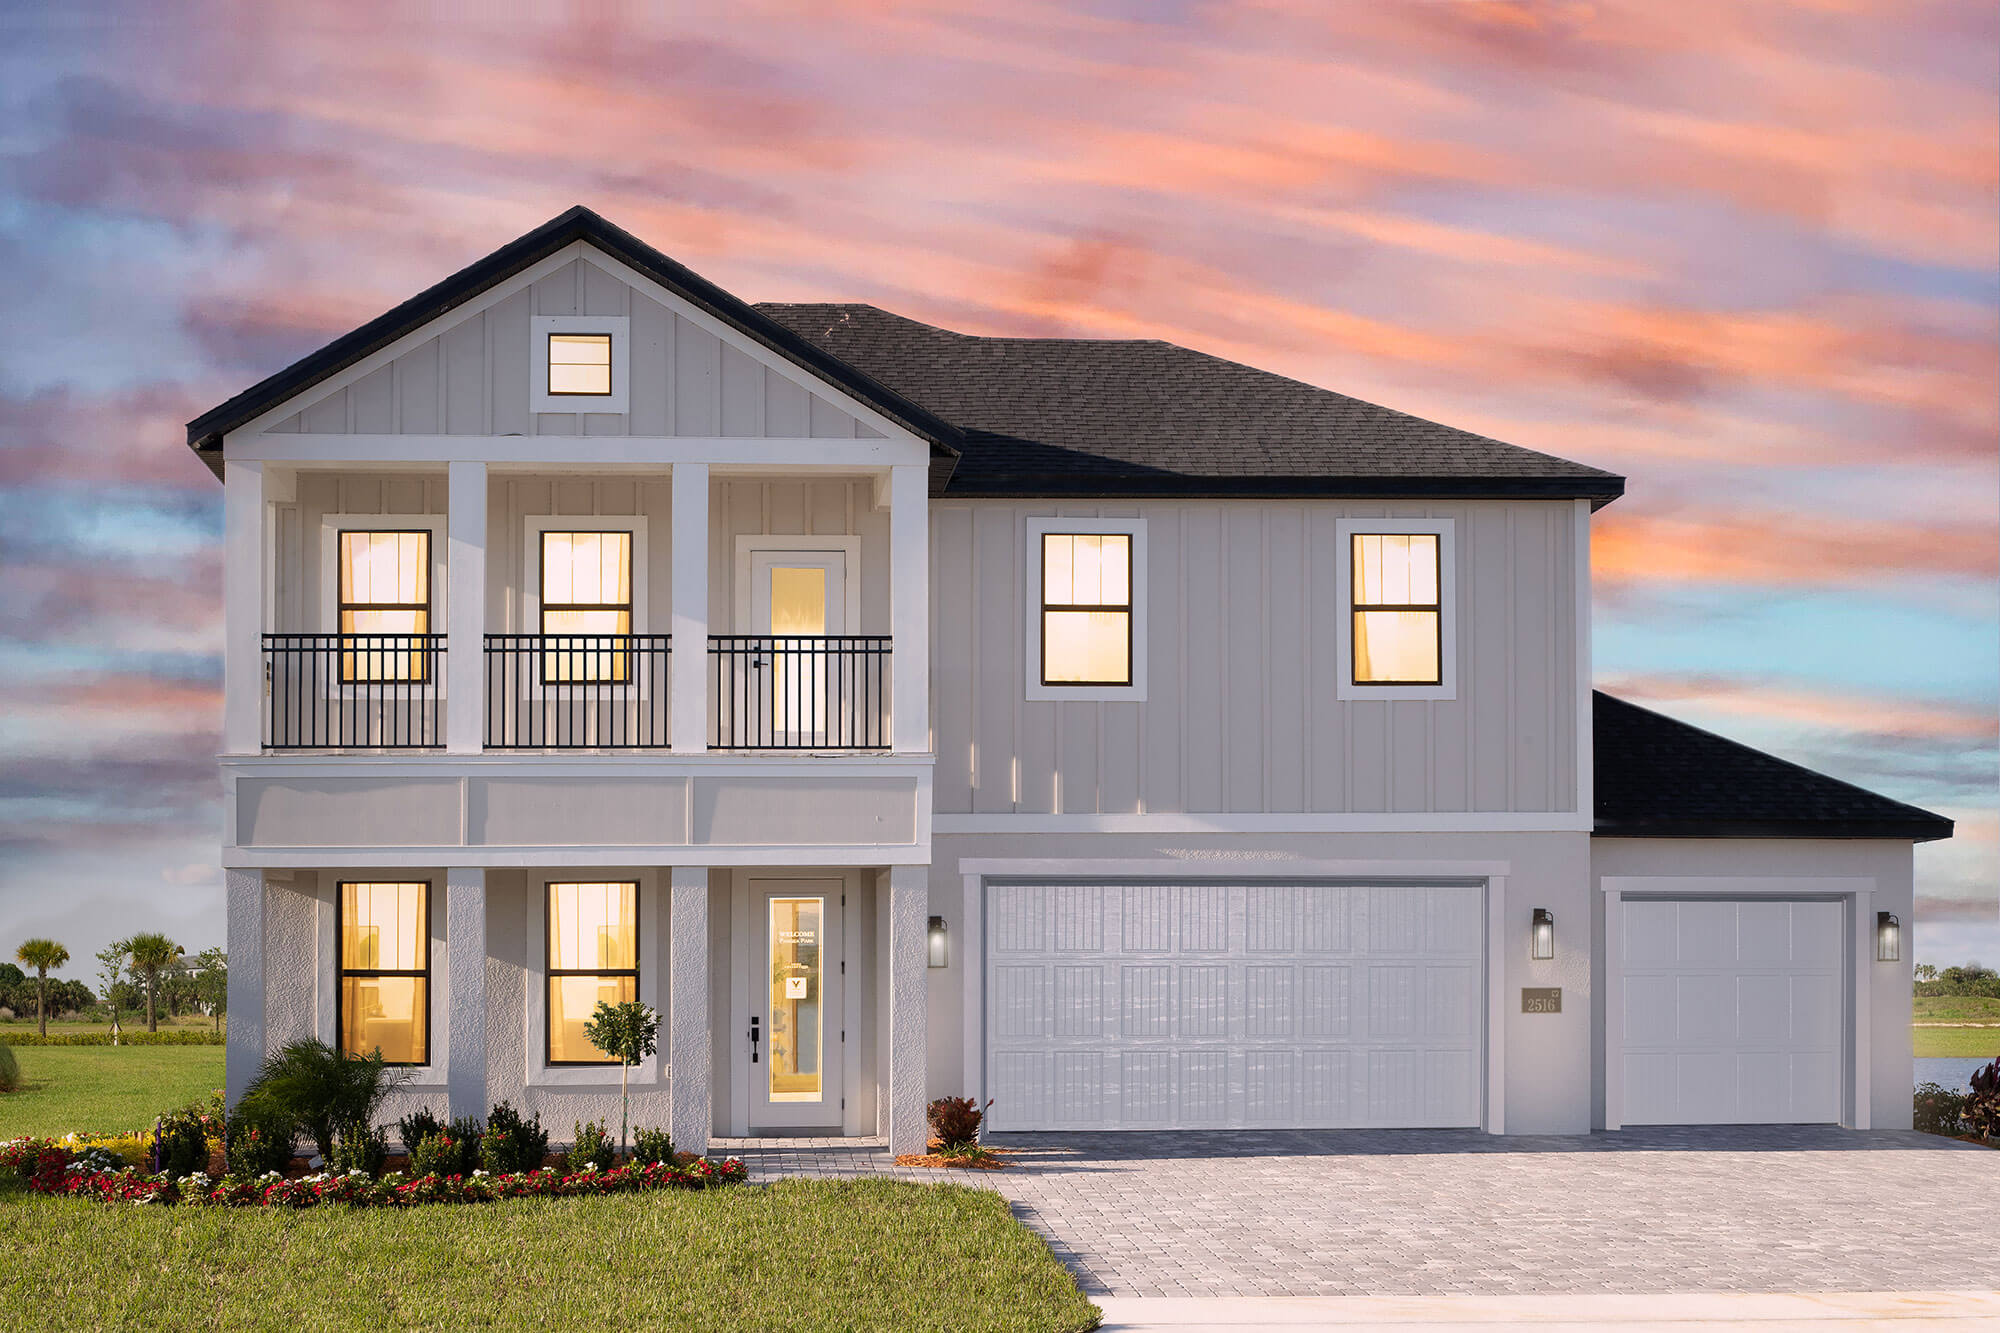 Viera Builders Pangea Park Highland Model exterior 2-story home with pink sunset